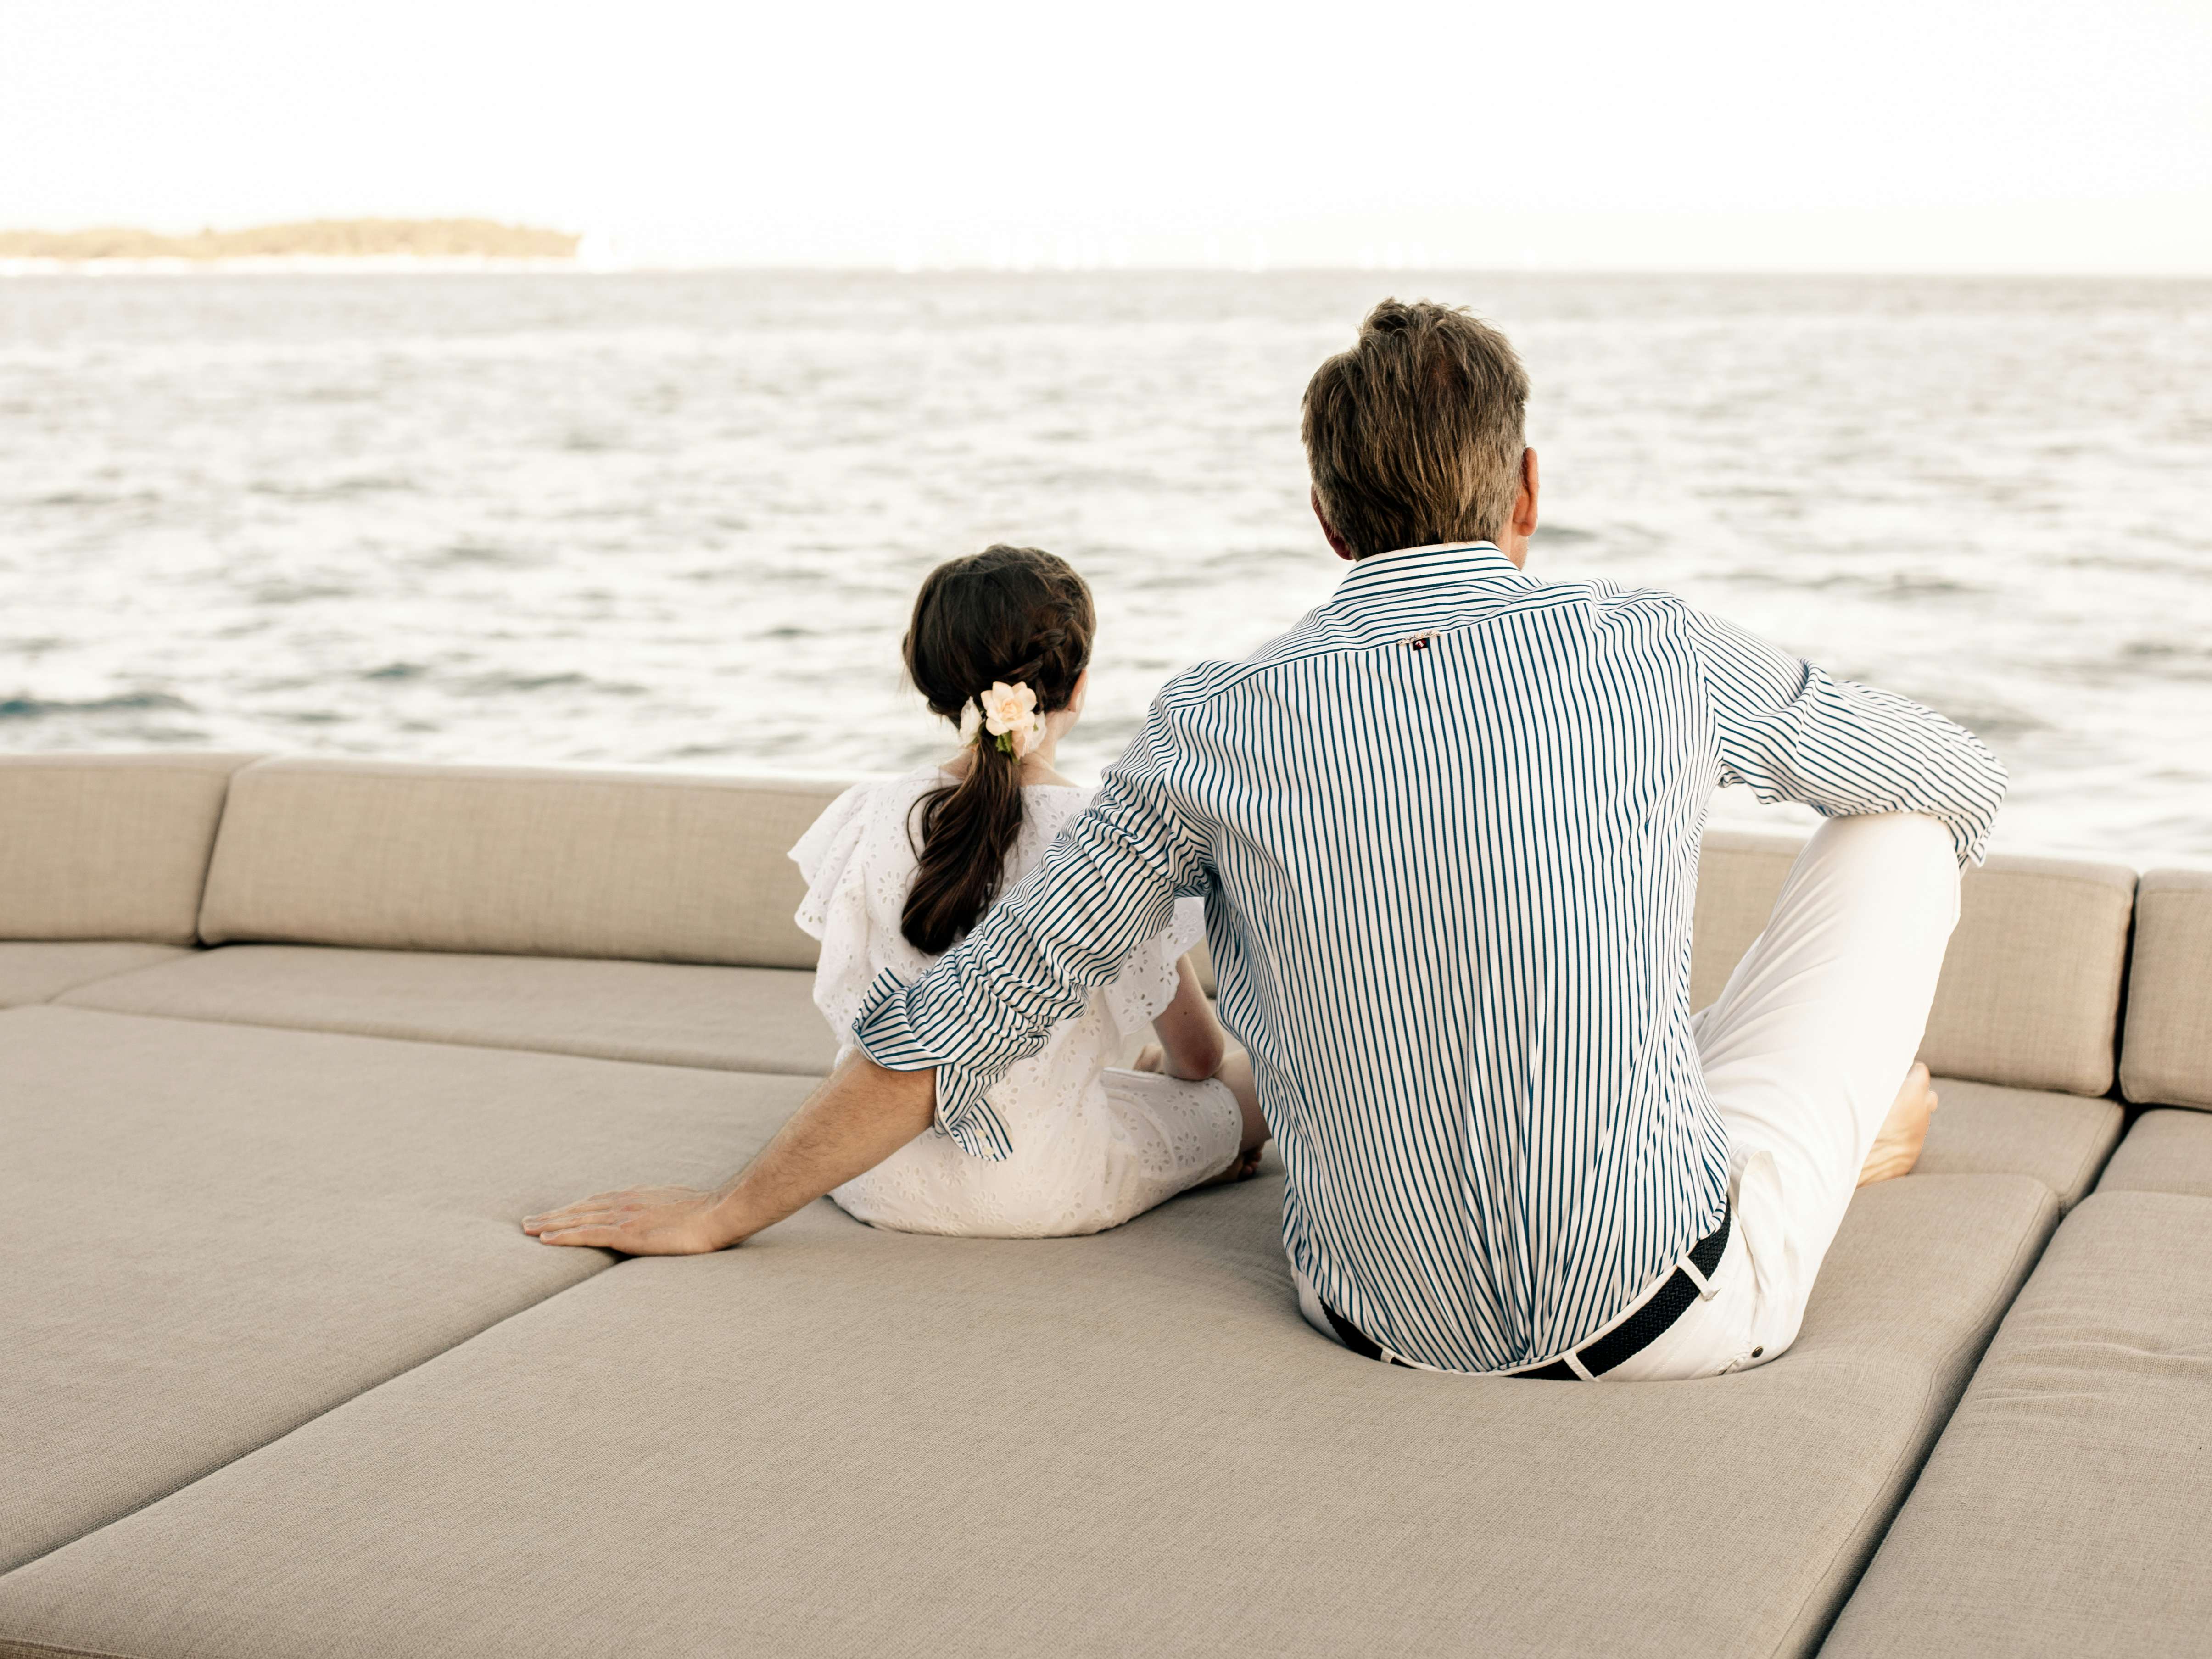 Father and daughter sitting on sun pads on board a luxury yacht looking at the horizon